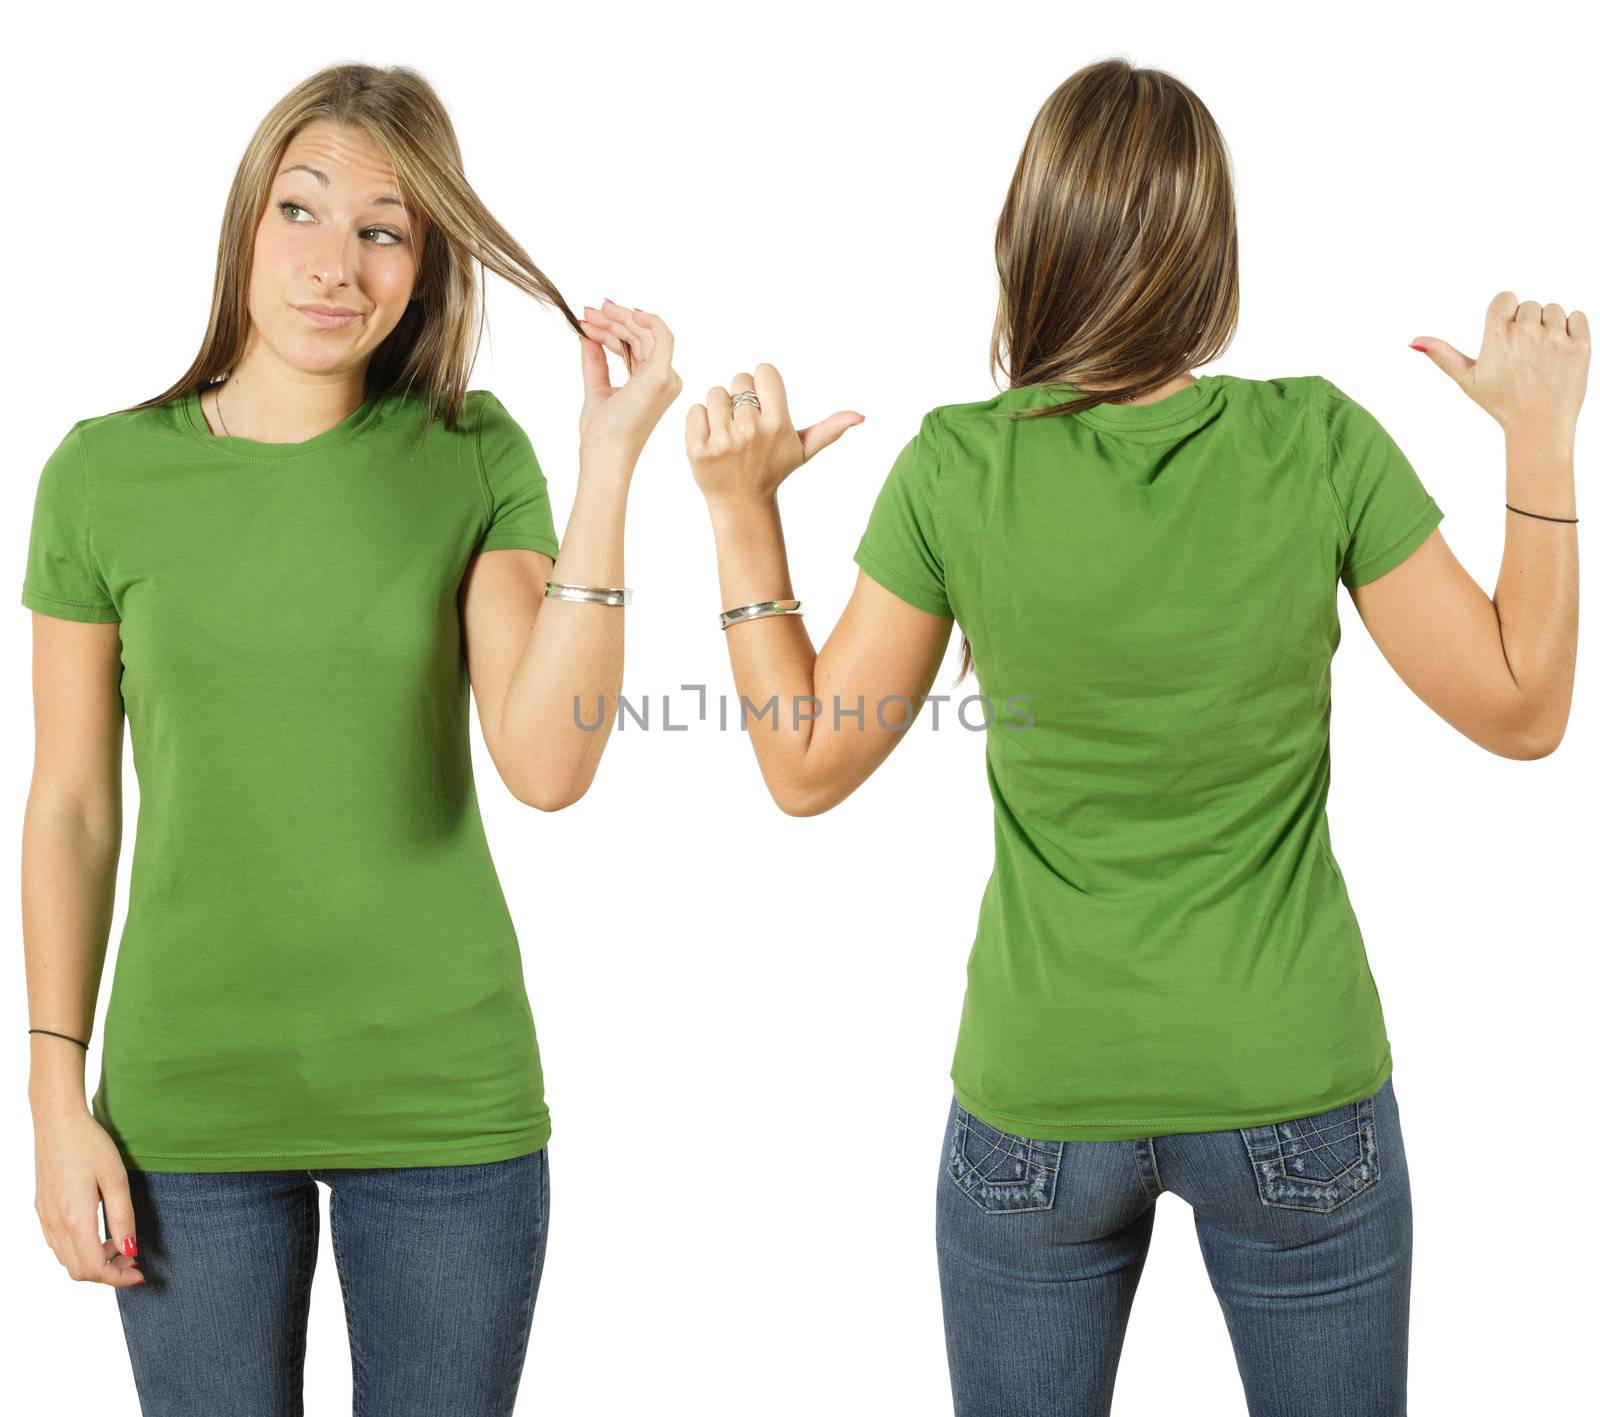 Young beautiful female with blank green shirt, front and back. Ready for your design or logo.